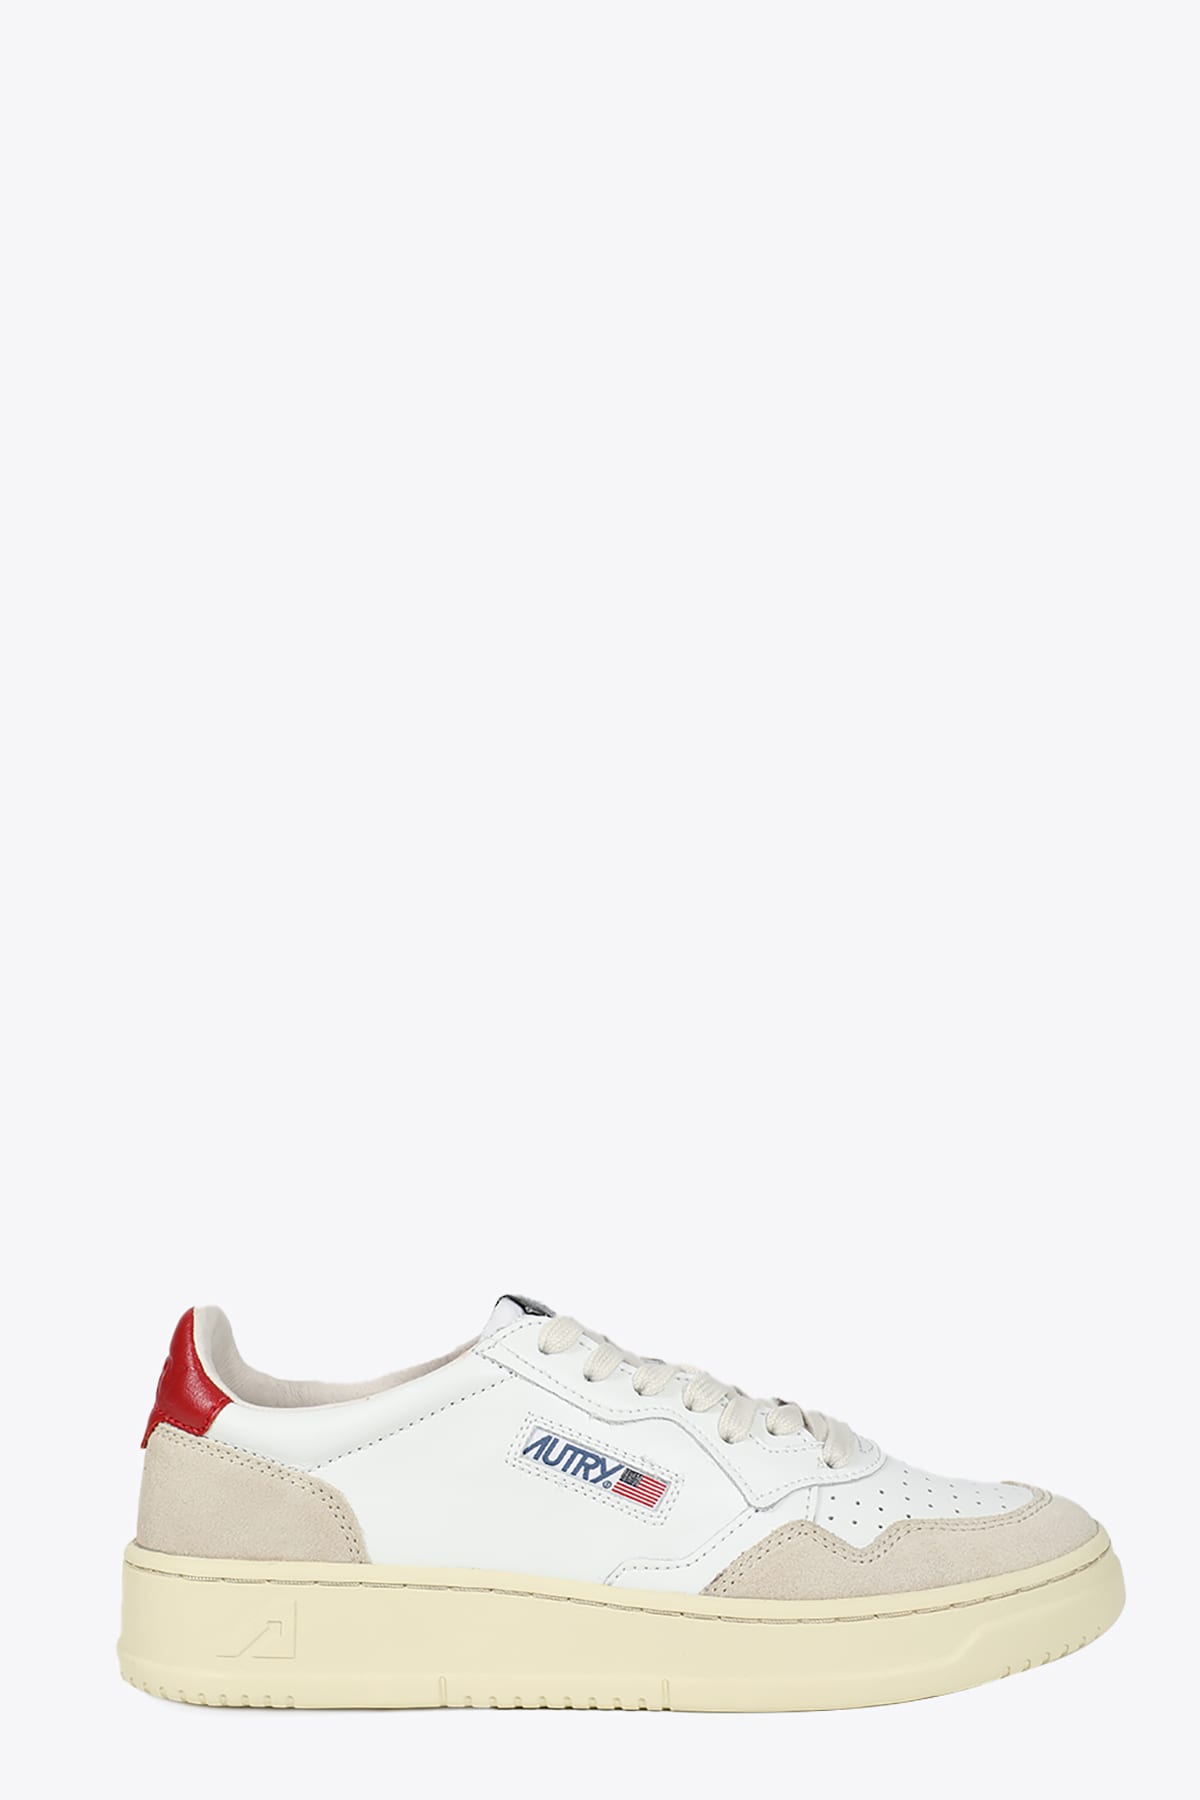 Autry 01 Low Man Leat/suede White and red leather low-top lace up sneakers - Medalist